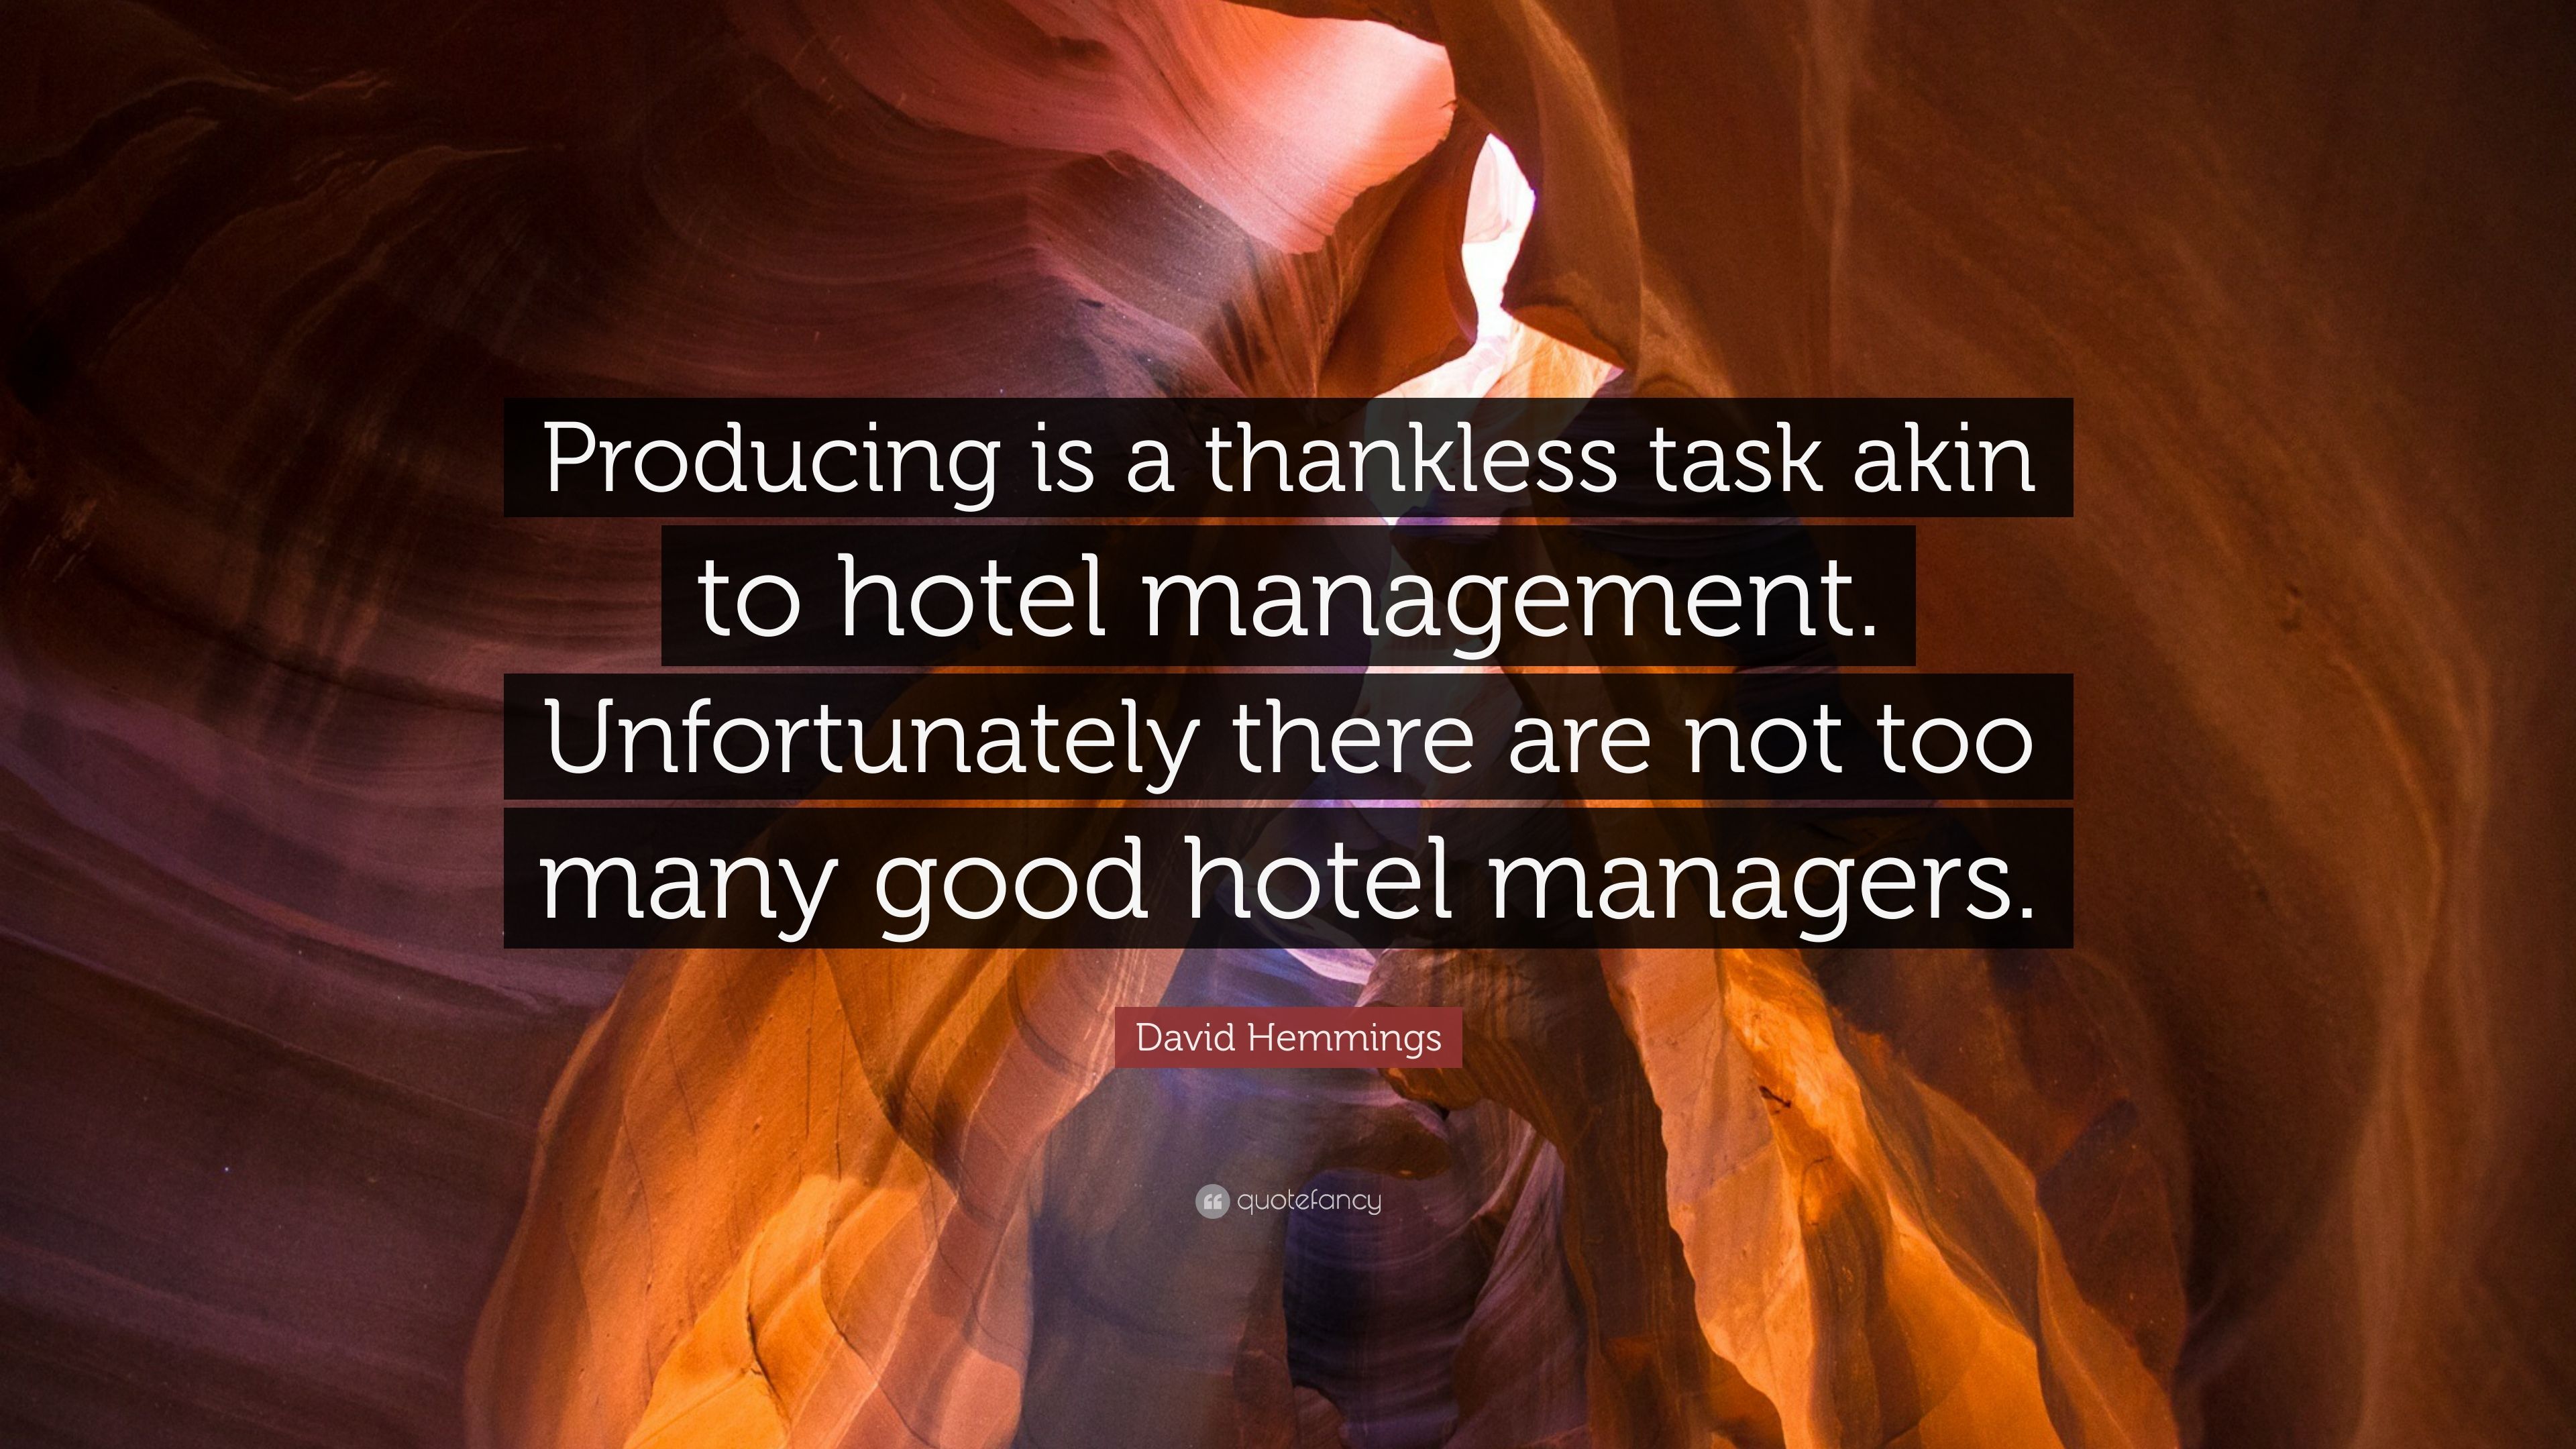 Producing is a thankless task akin to .quotefancy.com